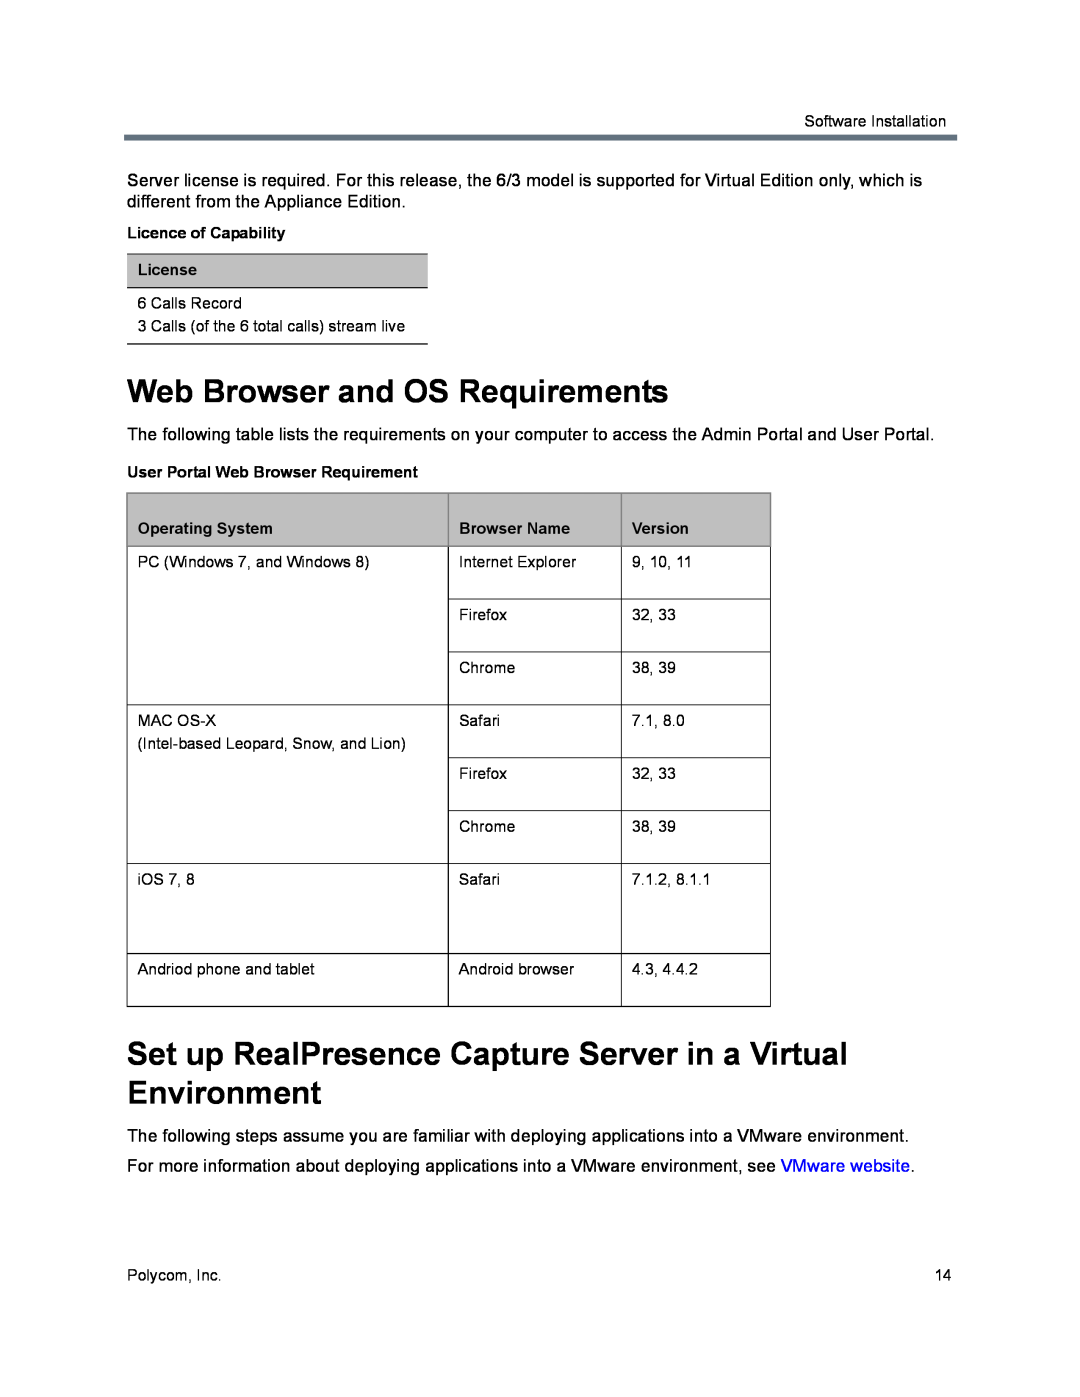 Polycom 40/0 Web Browser and OS Requirements, Set up RealPresence Capture Server in a Virtual Environment, Browser Name 